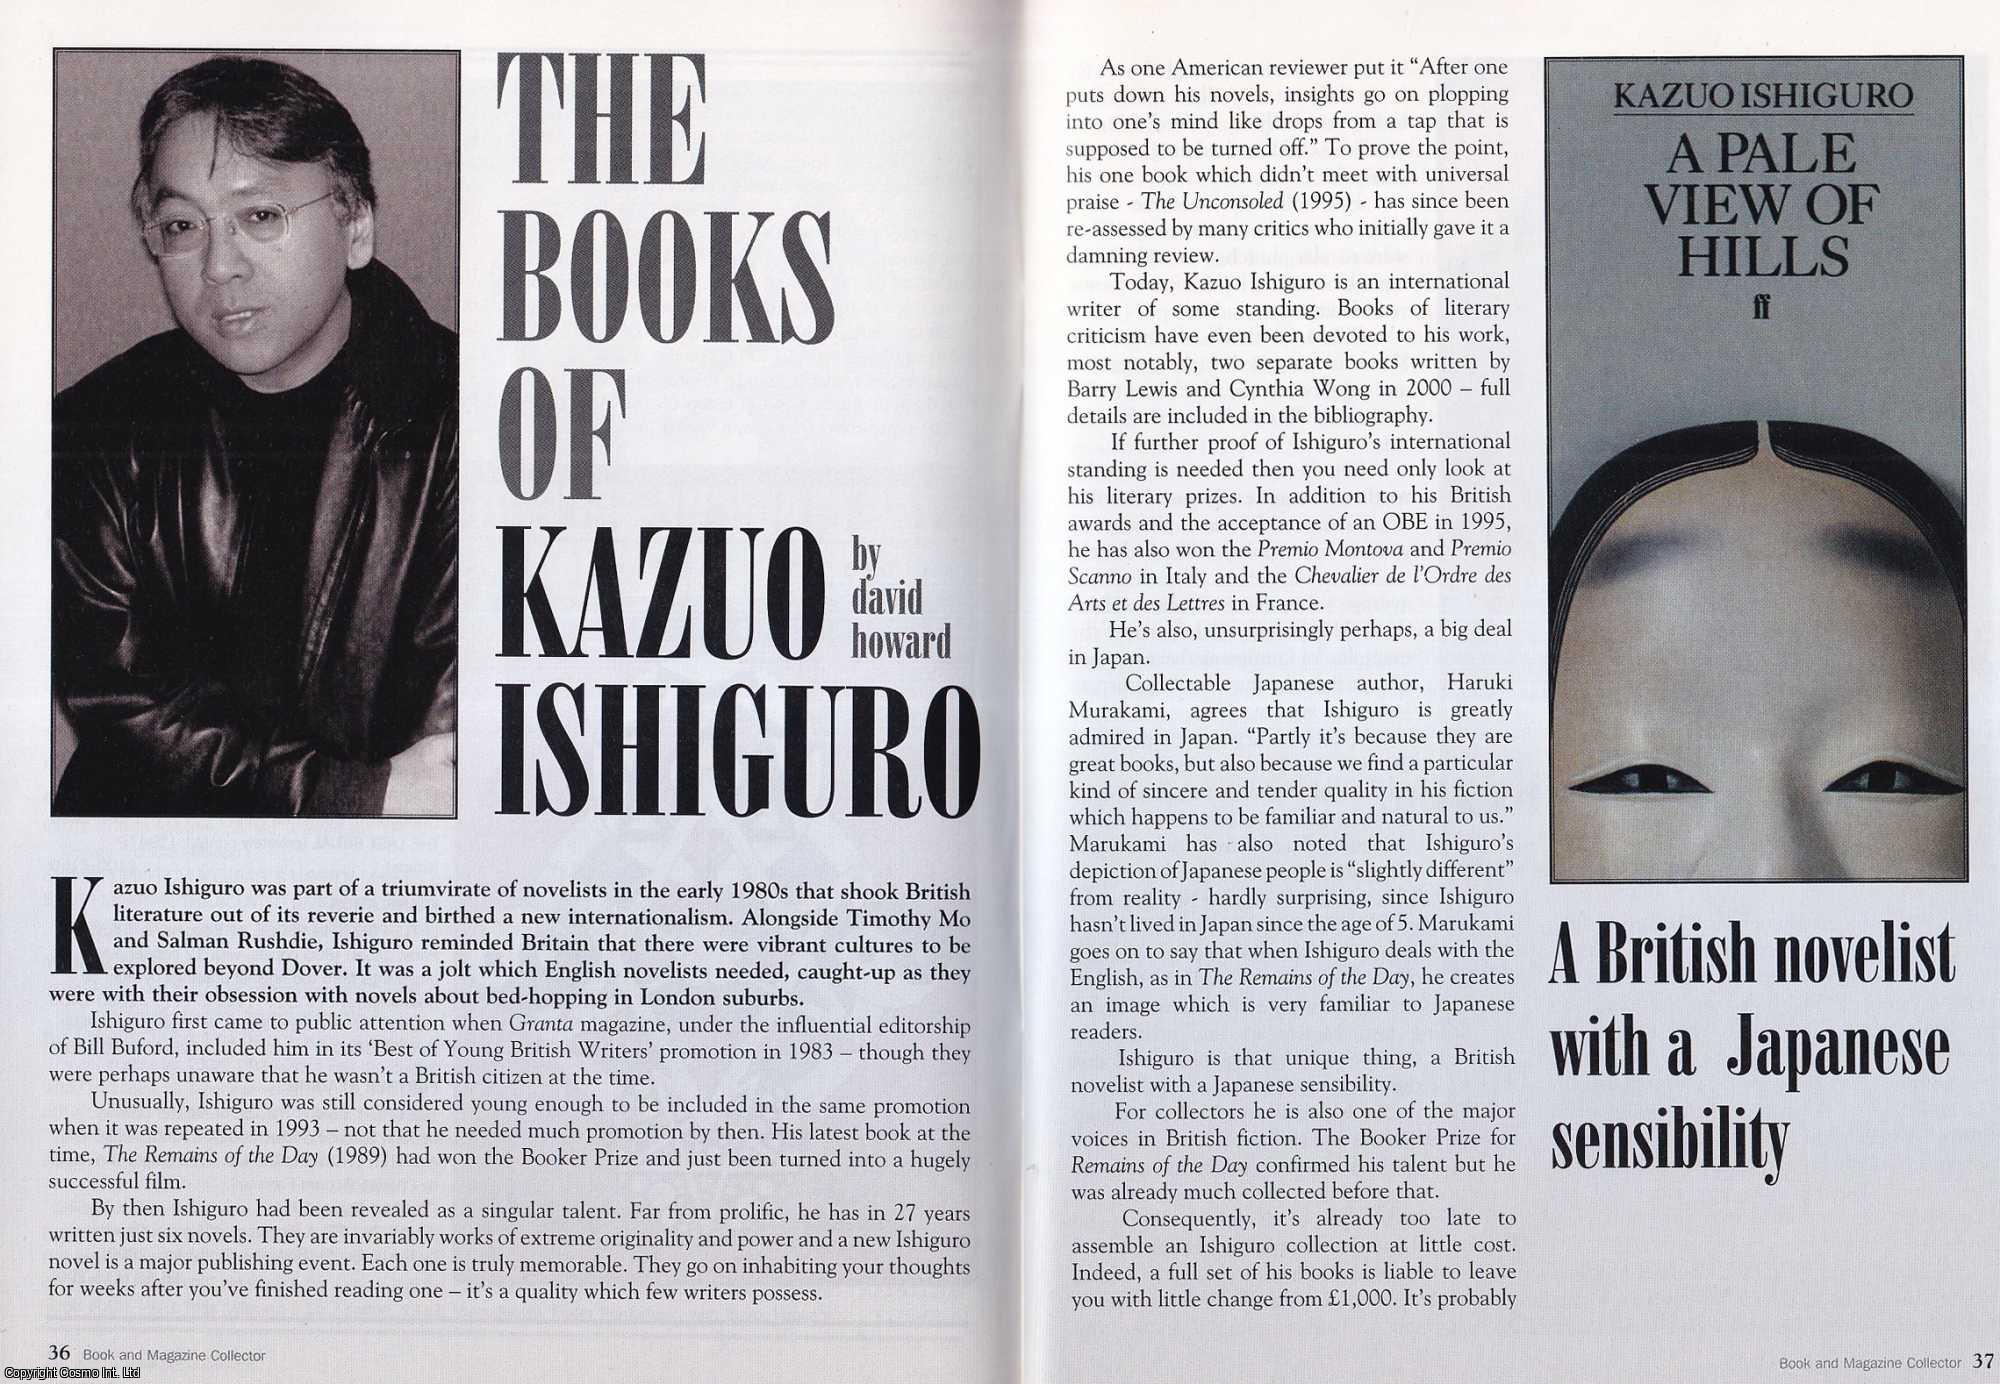 David Howard - The Books of Kazuo Ishiguro. This is an original article separated from an issue of The Book & Magazine Collector publication, 2008.